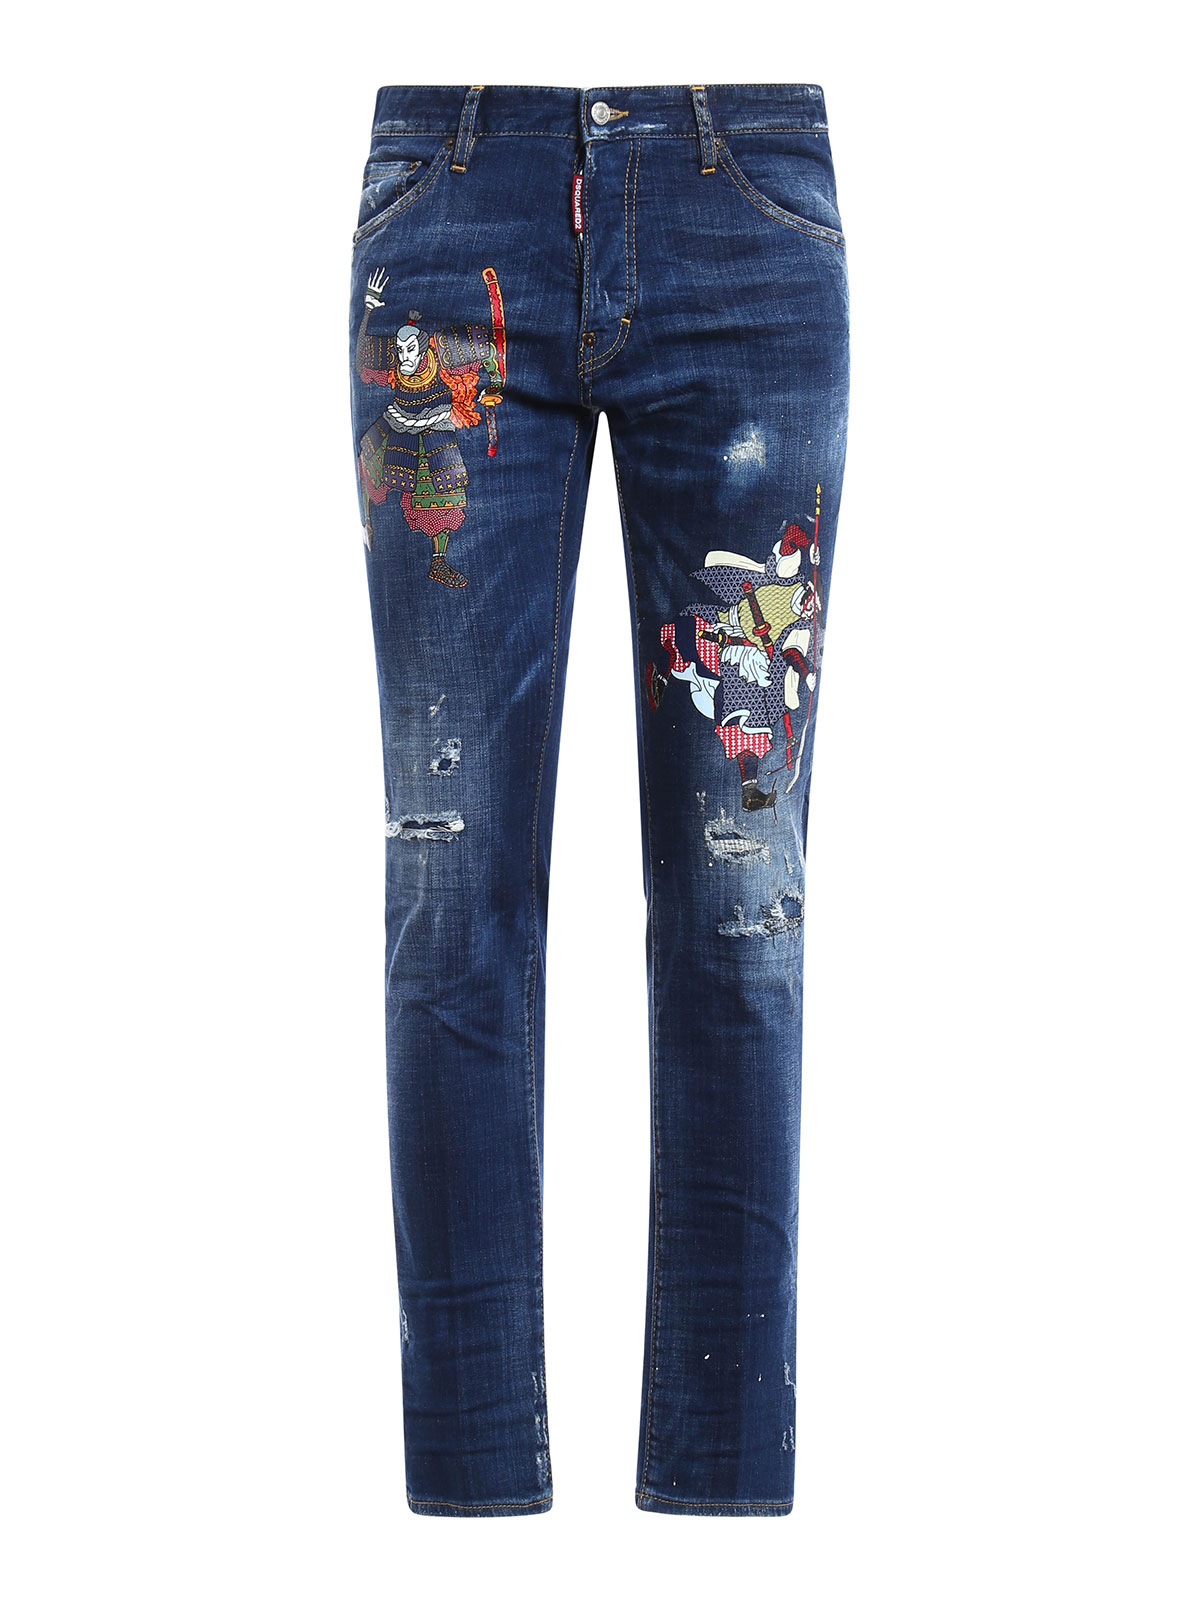 dsquared2 japanese jeans